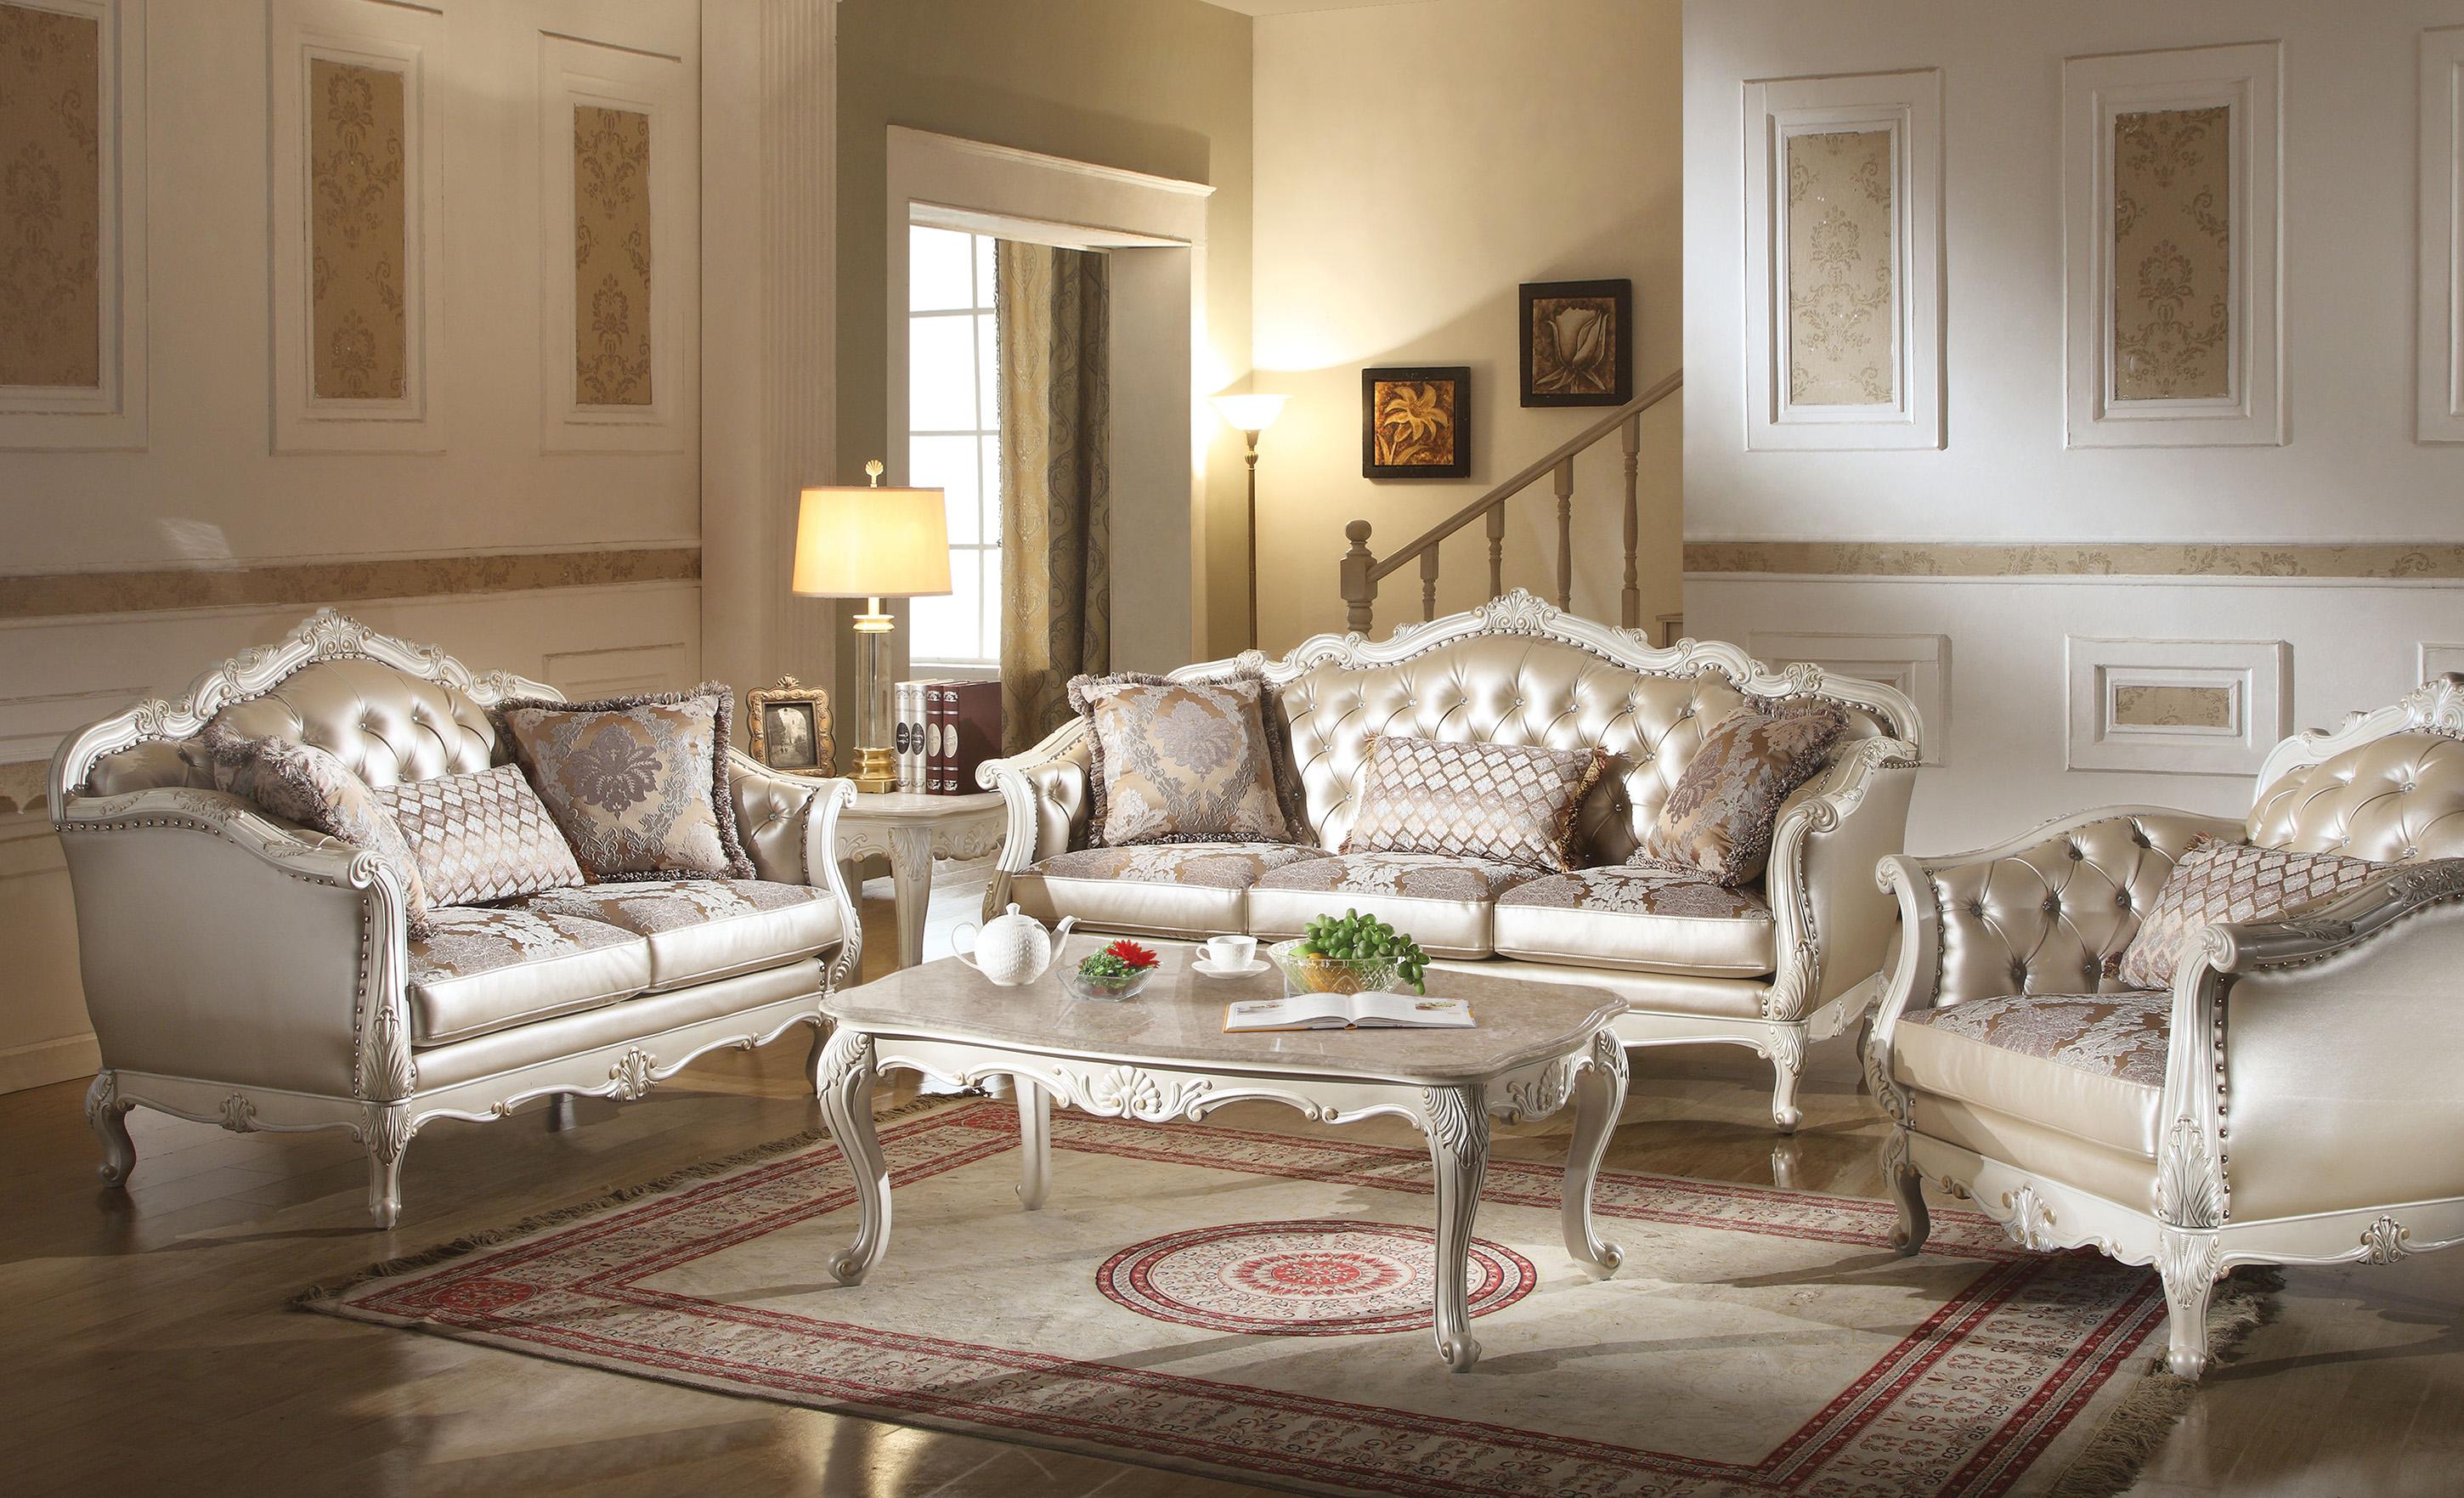 Classic, Traditional Sofa and Loveseat Set Chantelle 53540 53540 Chantelle - Set-2 in Pearl White, Platinum, Gold Fabric